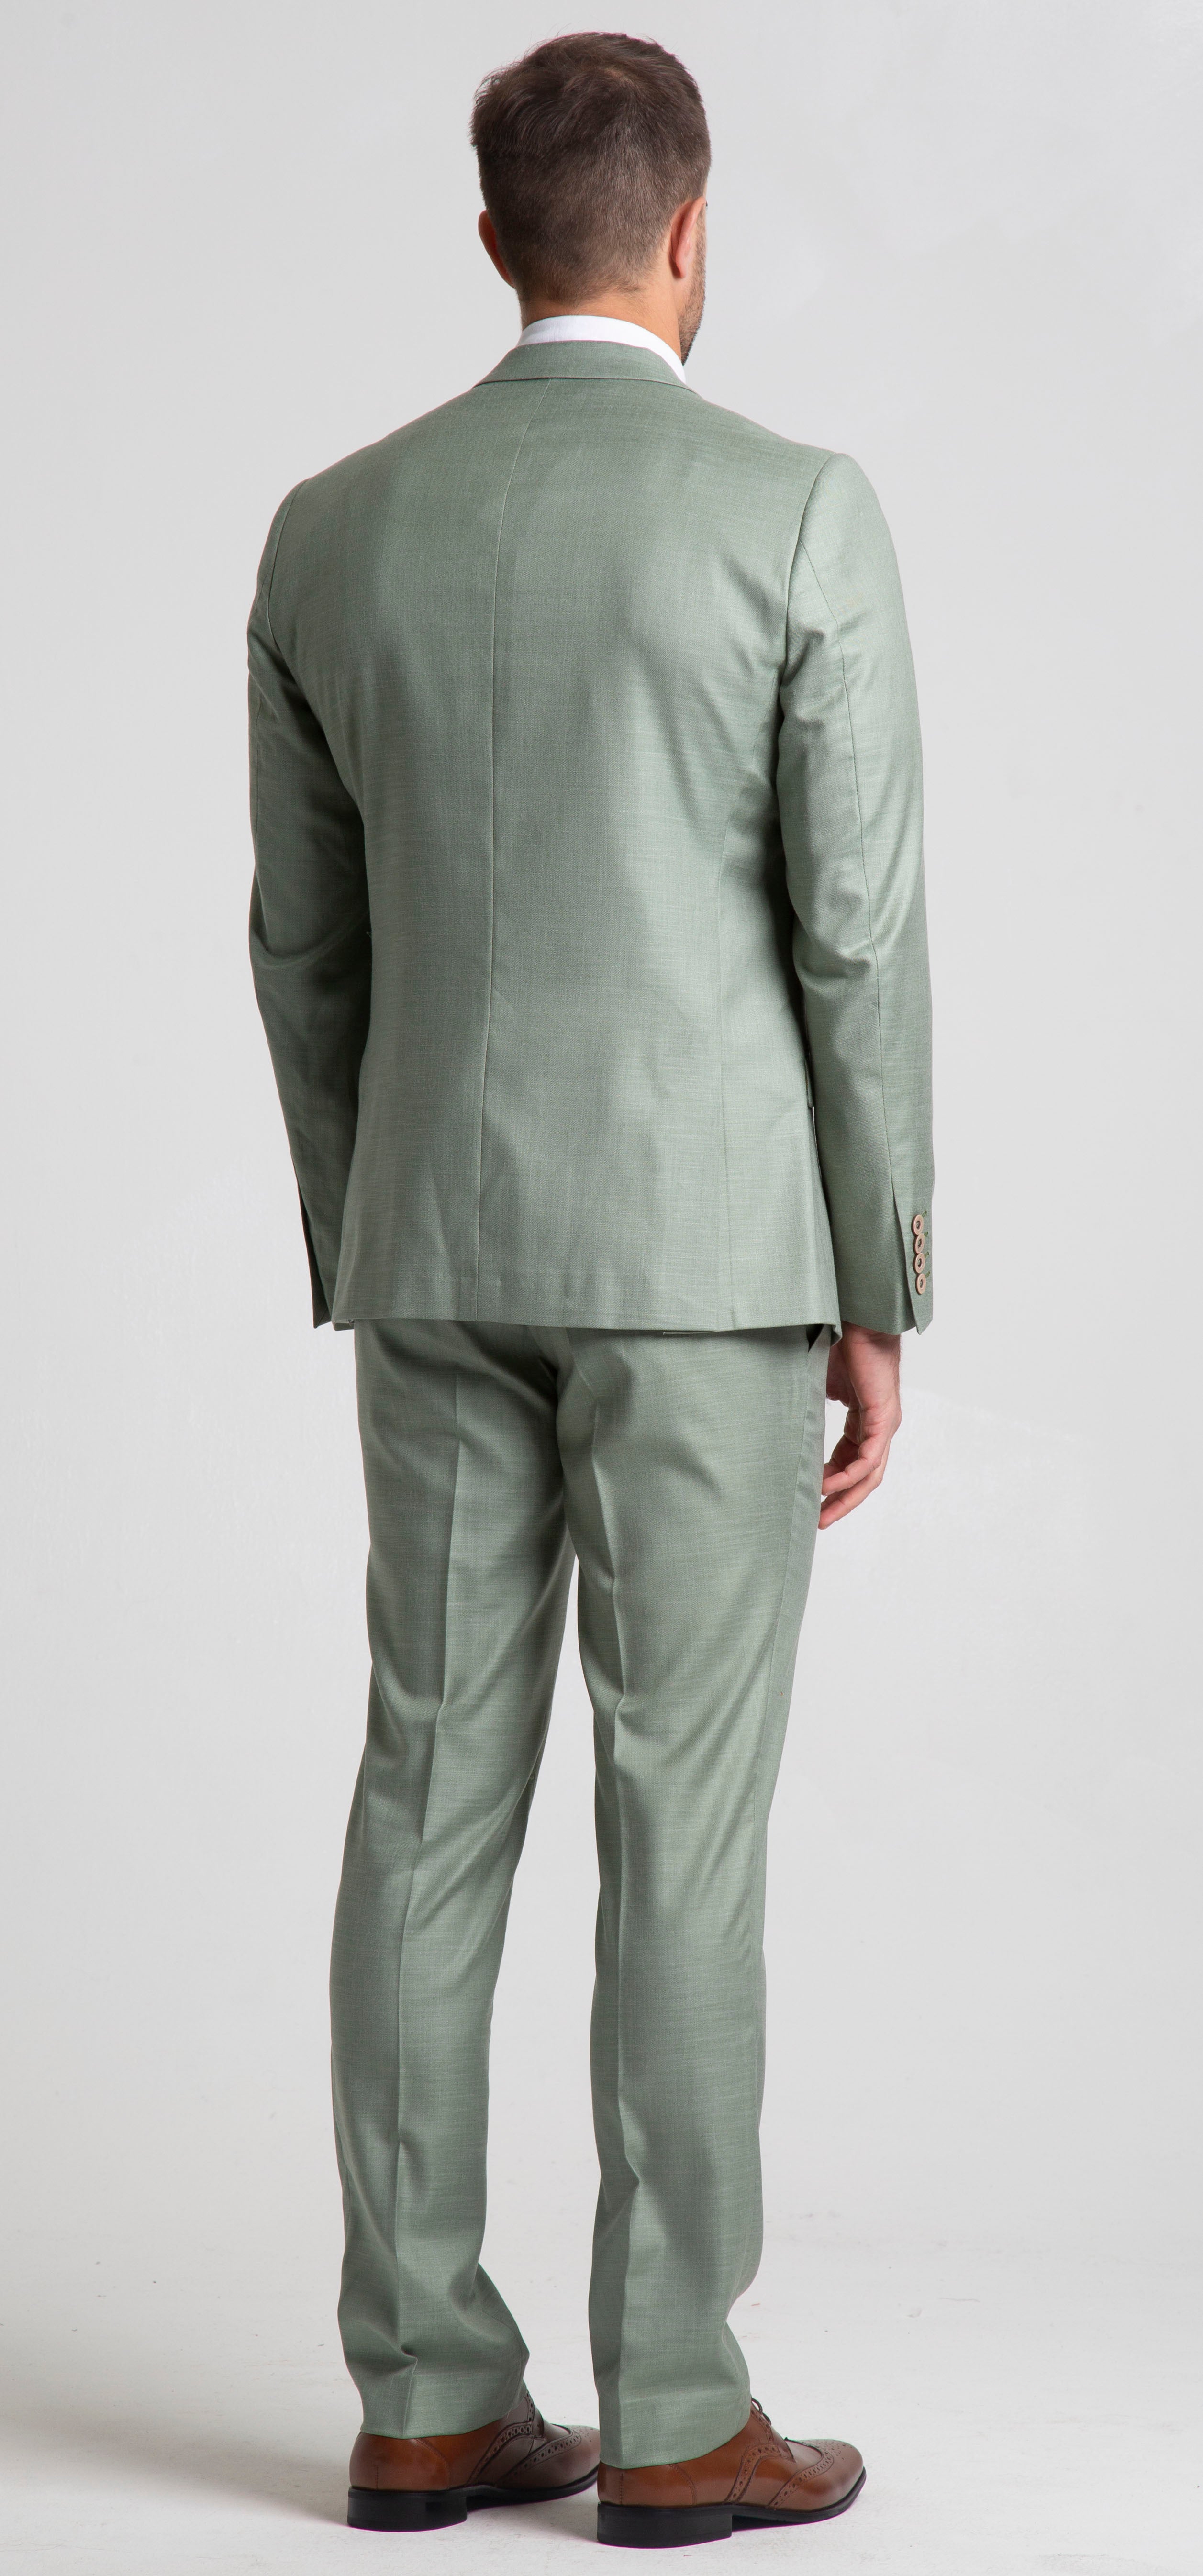 Paisley & Gray Dover Notch Fern Green Suit